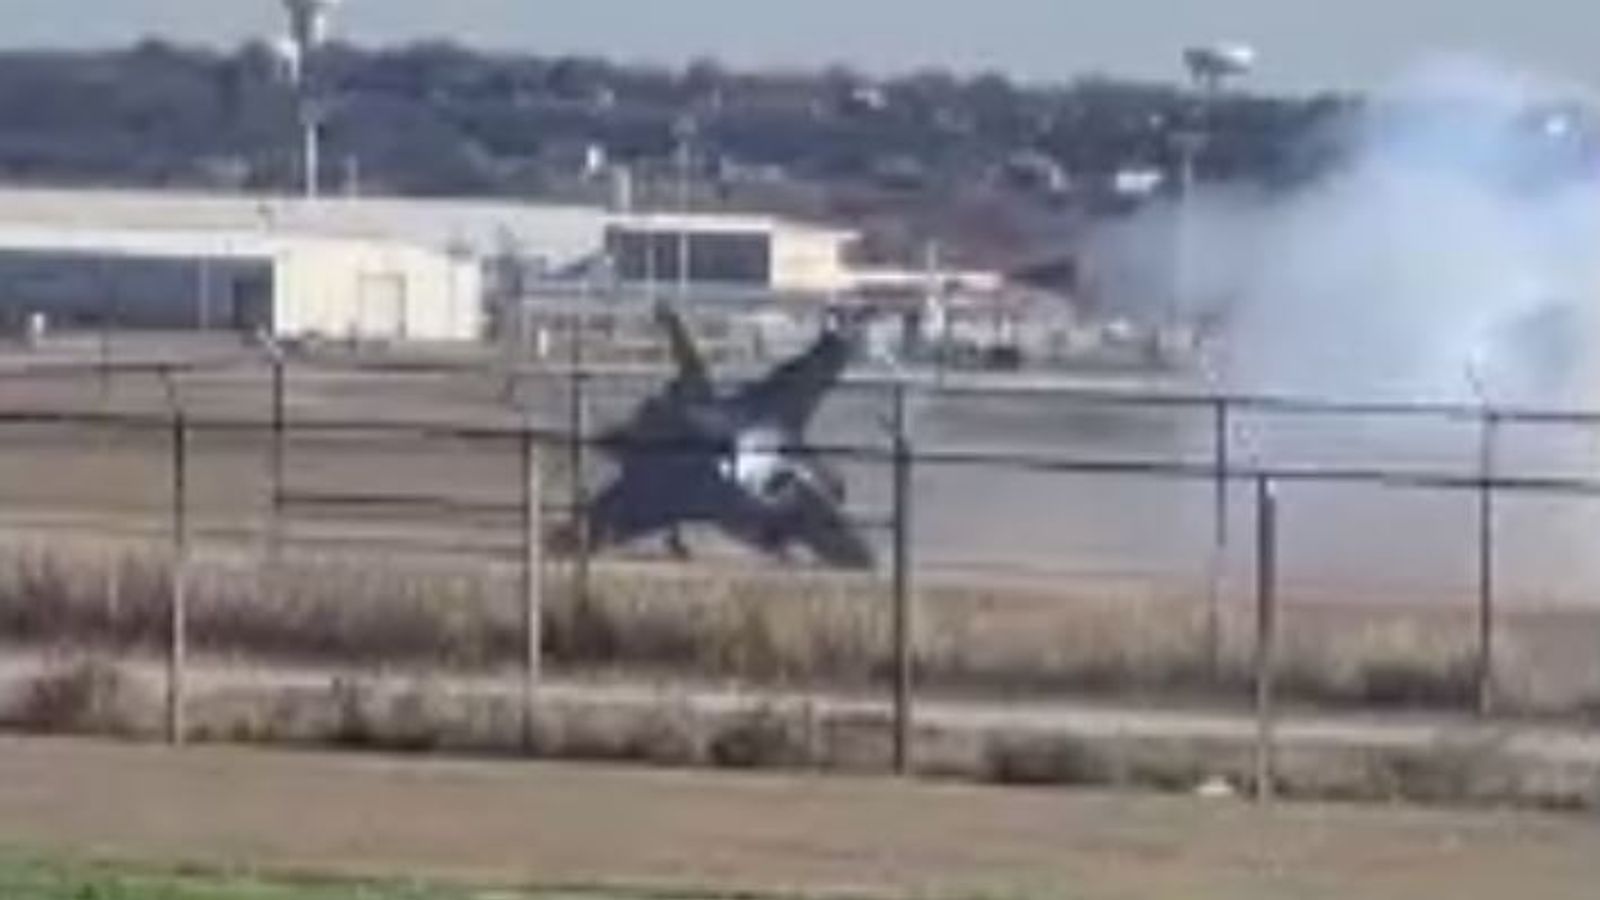 Failed landing sees pilot eject as military jet nosedives onto runway in Texas